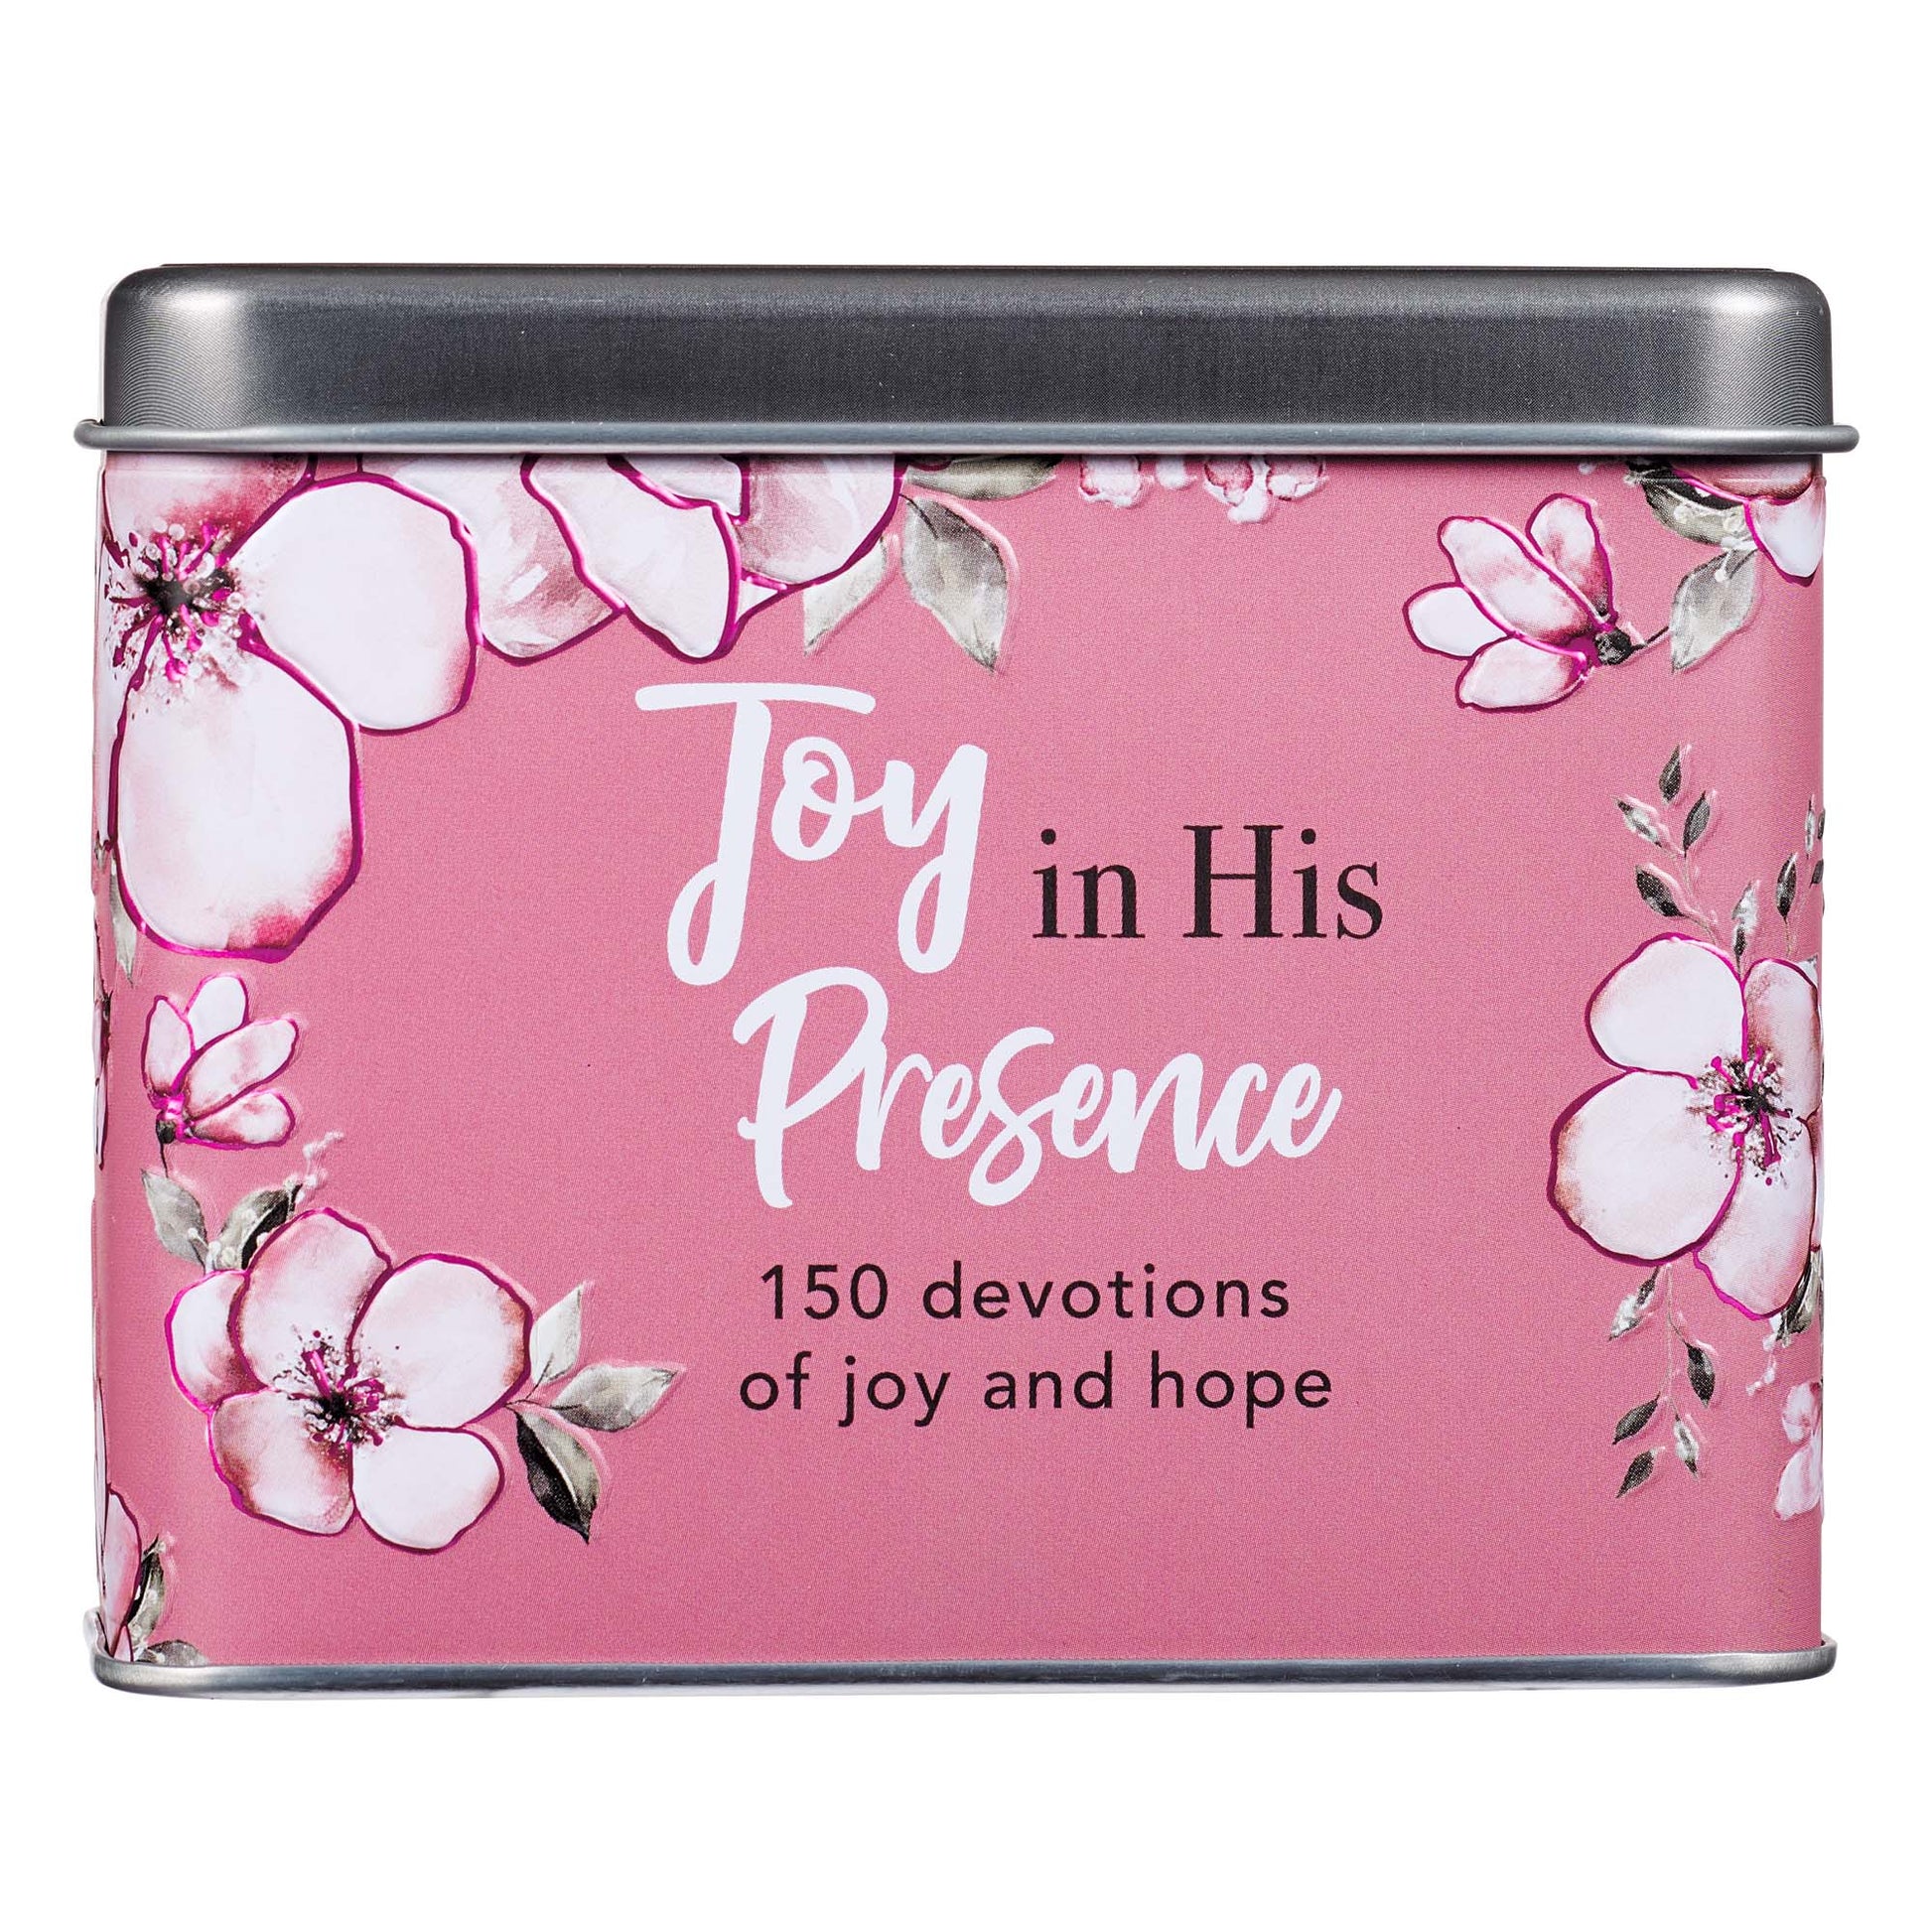 Joy in His Presence Devotional Cards in a Tin - The Christian Gift Company